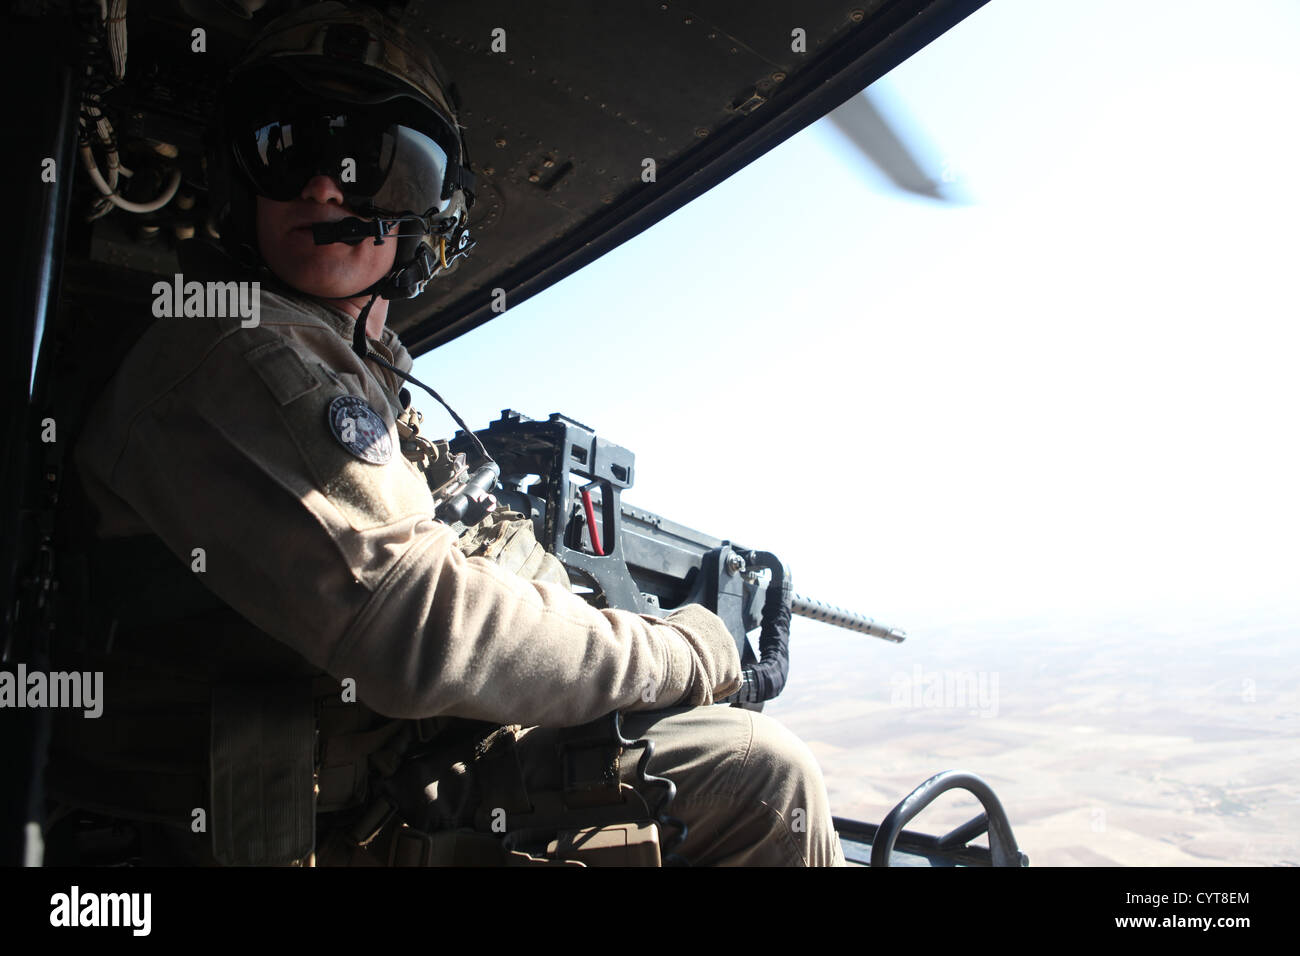 U.S. Marine Corps Cpl. Jeffery L. Allen, crew chief with Marine Light Attack Helicopter Squadron (HMLA) 469, Marine Aircraft Group 39, 3rd Marine Aircraft Wing (Forward), provides close air support over Helmand province, Afghanistan, Nov. 8, 2012. Allen p Stock Photo